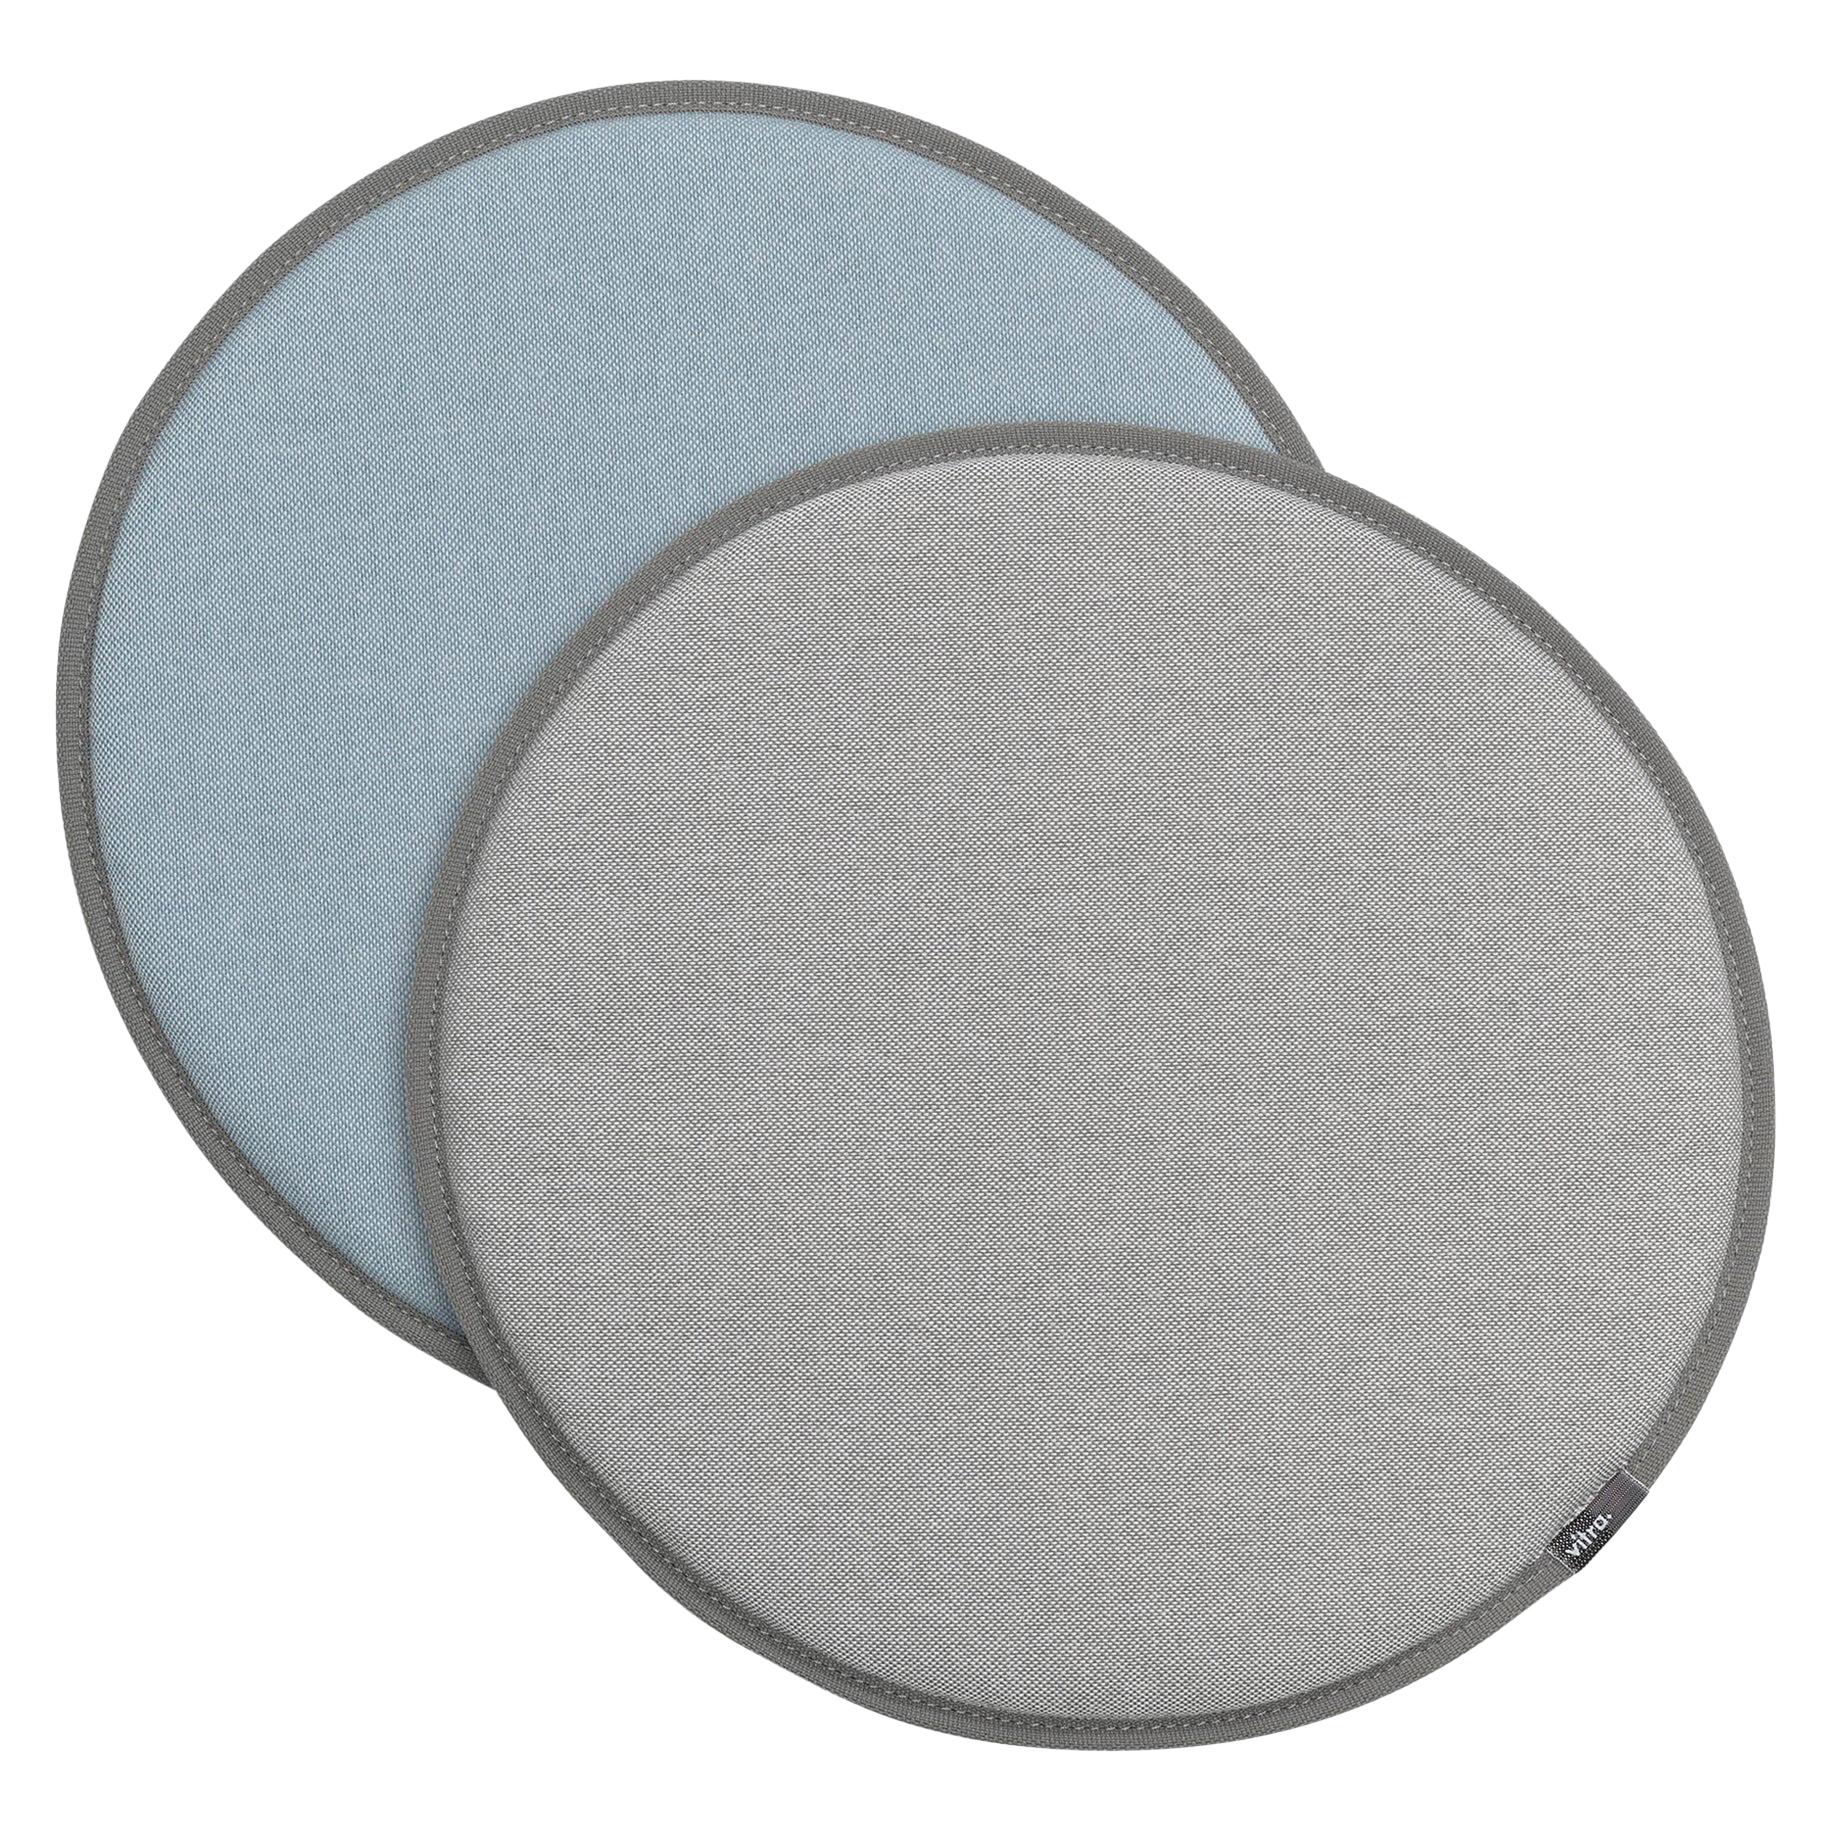 Vitra Seat Dot Cushion in Cream, Greys and Ice Blue by Hella Jongerius For Sale